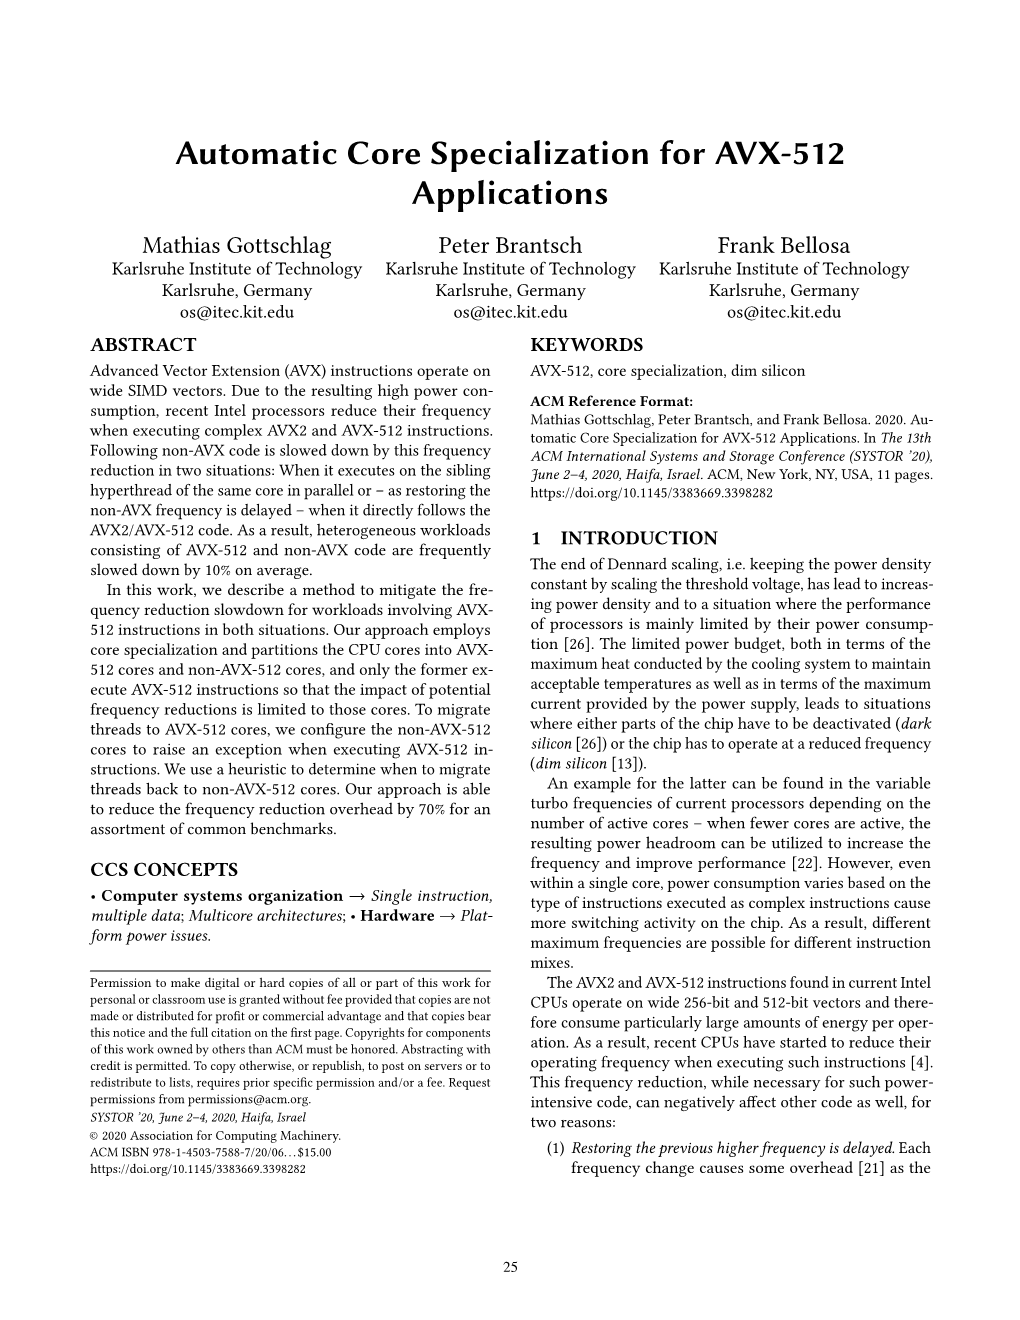 Automatic Core Specialization for AVX-512 Applications